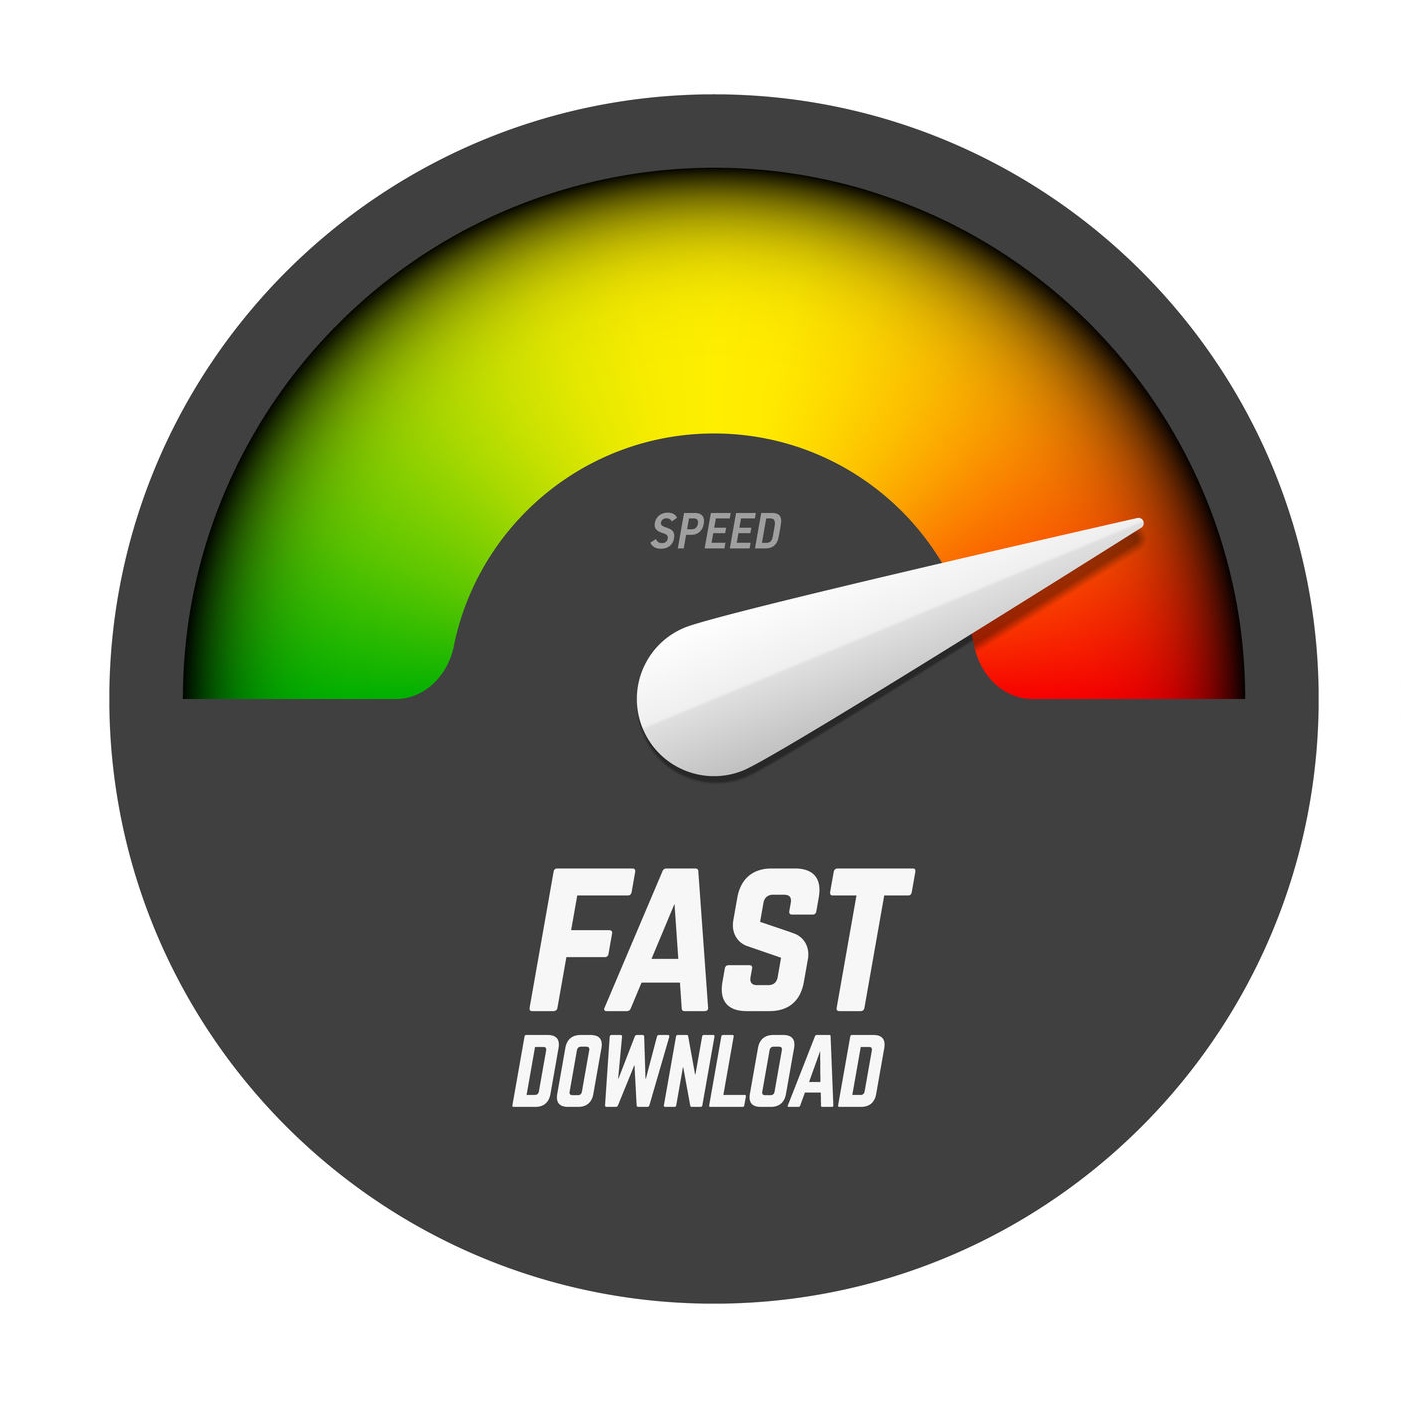 what is a good download speed for home internet